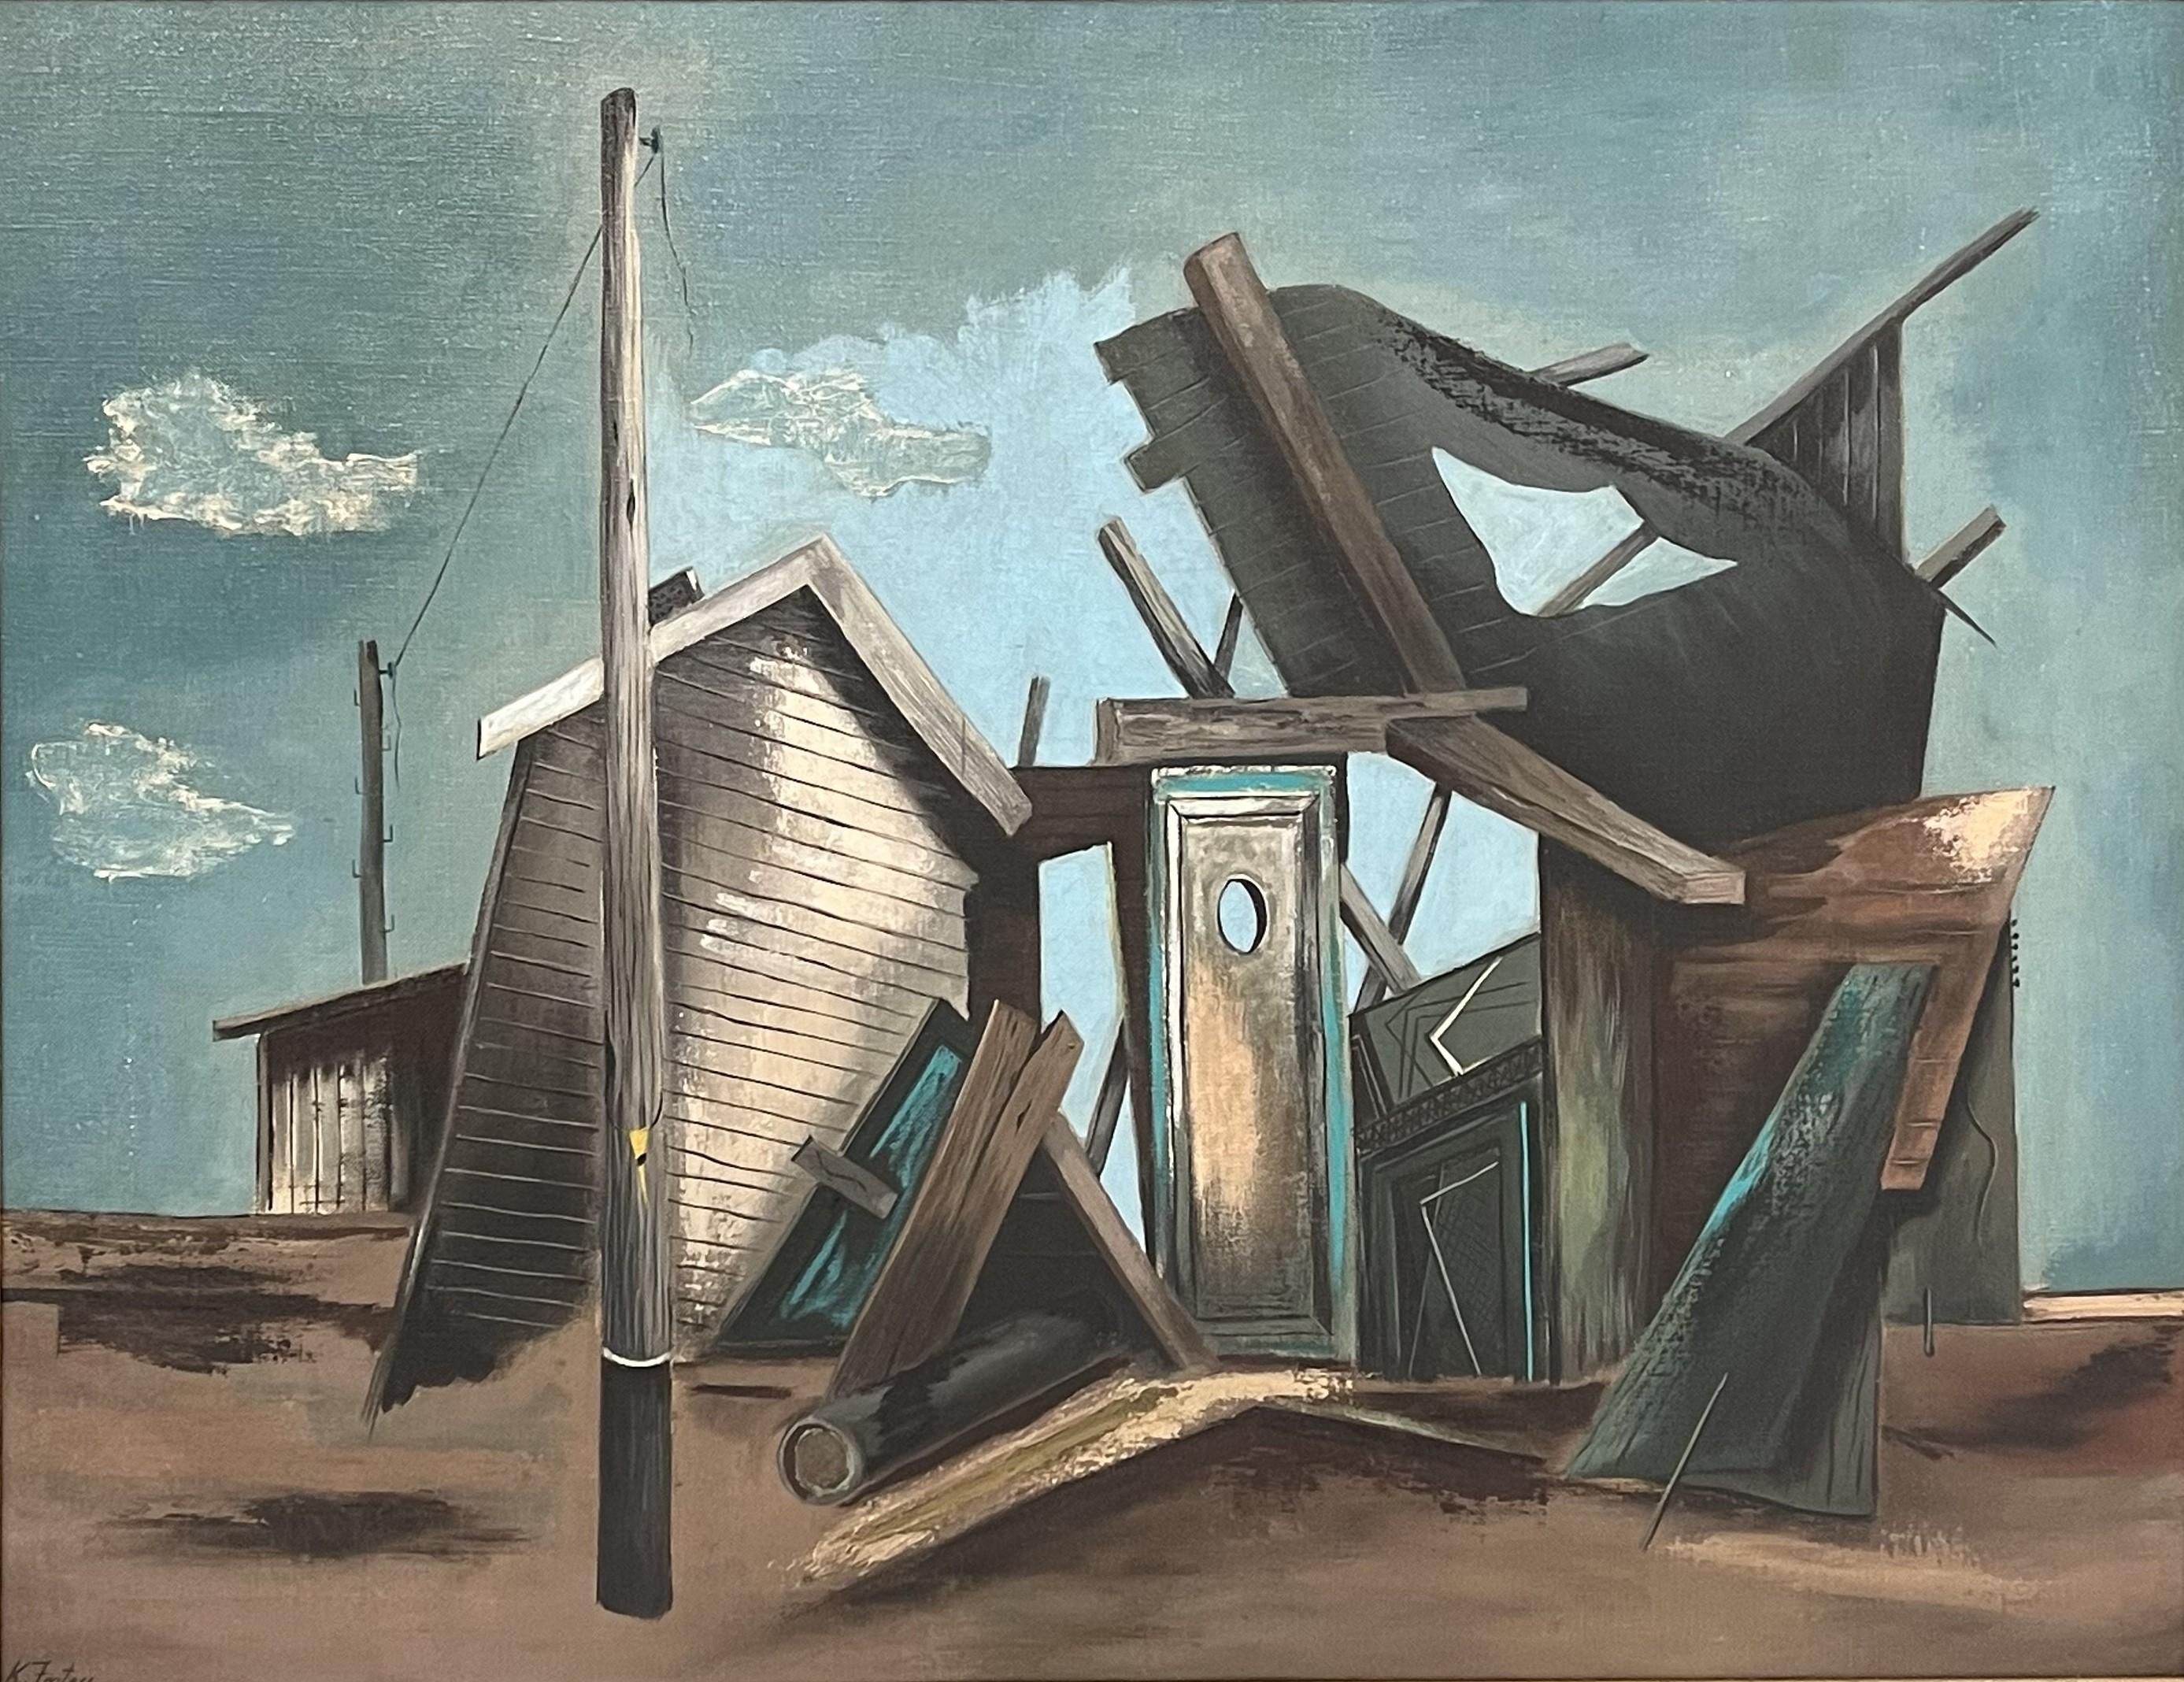 Karl Fortress Landscape Painting - Untitled (Collapsed Shacks)